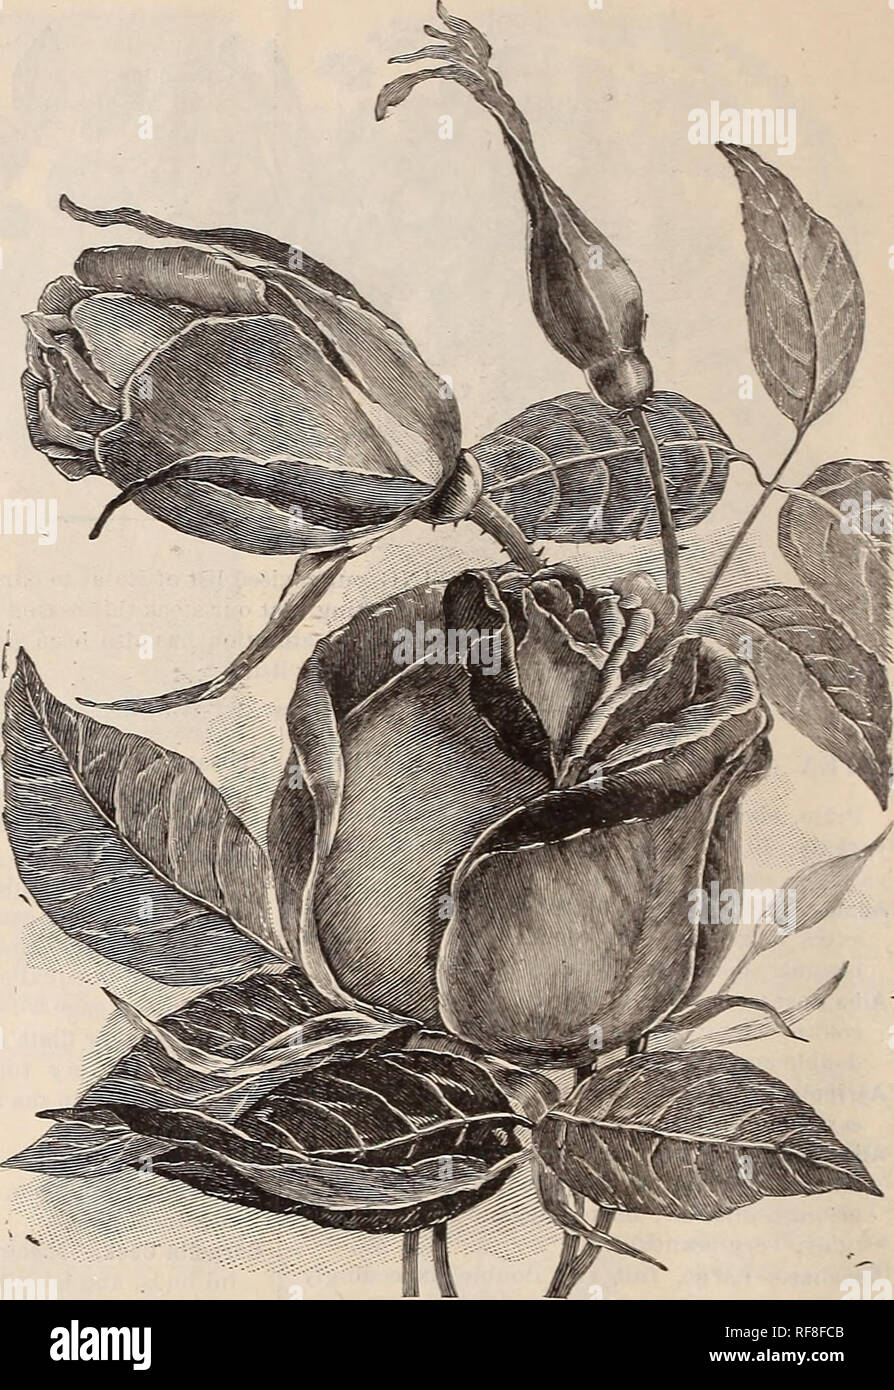 . Catalogue of plants : spring 1889. Nursery stock Ohio Catalogs; Flowers Catalogs. 20 A. R. Alclrich, Florist, Springfield, Ohio. ROSES -Continued. Duchess of Edinburgh.—A splendid Rose, in great demand for its lovely buds, and remarkable for its beautiful color, Tvhich is of the most in- tense glowing scarlet. Price, 15 cents. Hermosa.—Always beau- tiful and always in bloom. The flower is cupped, full and finely formed, the mo?t pleas- ing shade of pink, soft but deep, fragrant. A standard variety. Isabella Sprunt.—A lovely Tea Eose of exquisite fragrance, clear lemon- yellow, a continuous a Stock Photo